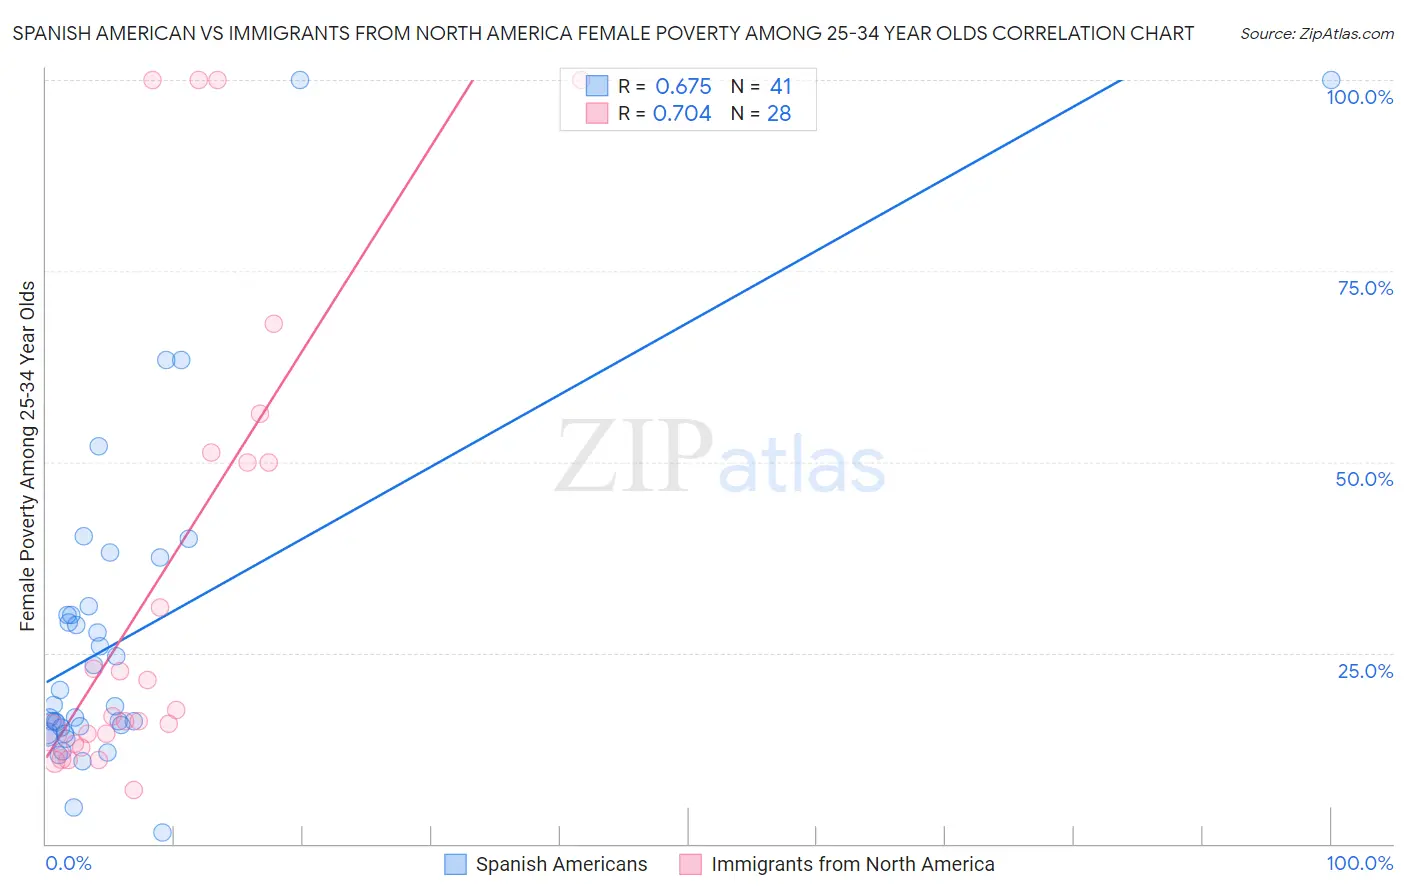 Spanish American vs Immigrants from North America Female Poverty Among 25-34 Year Olds